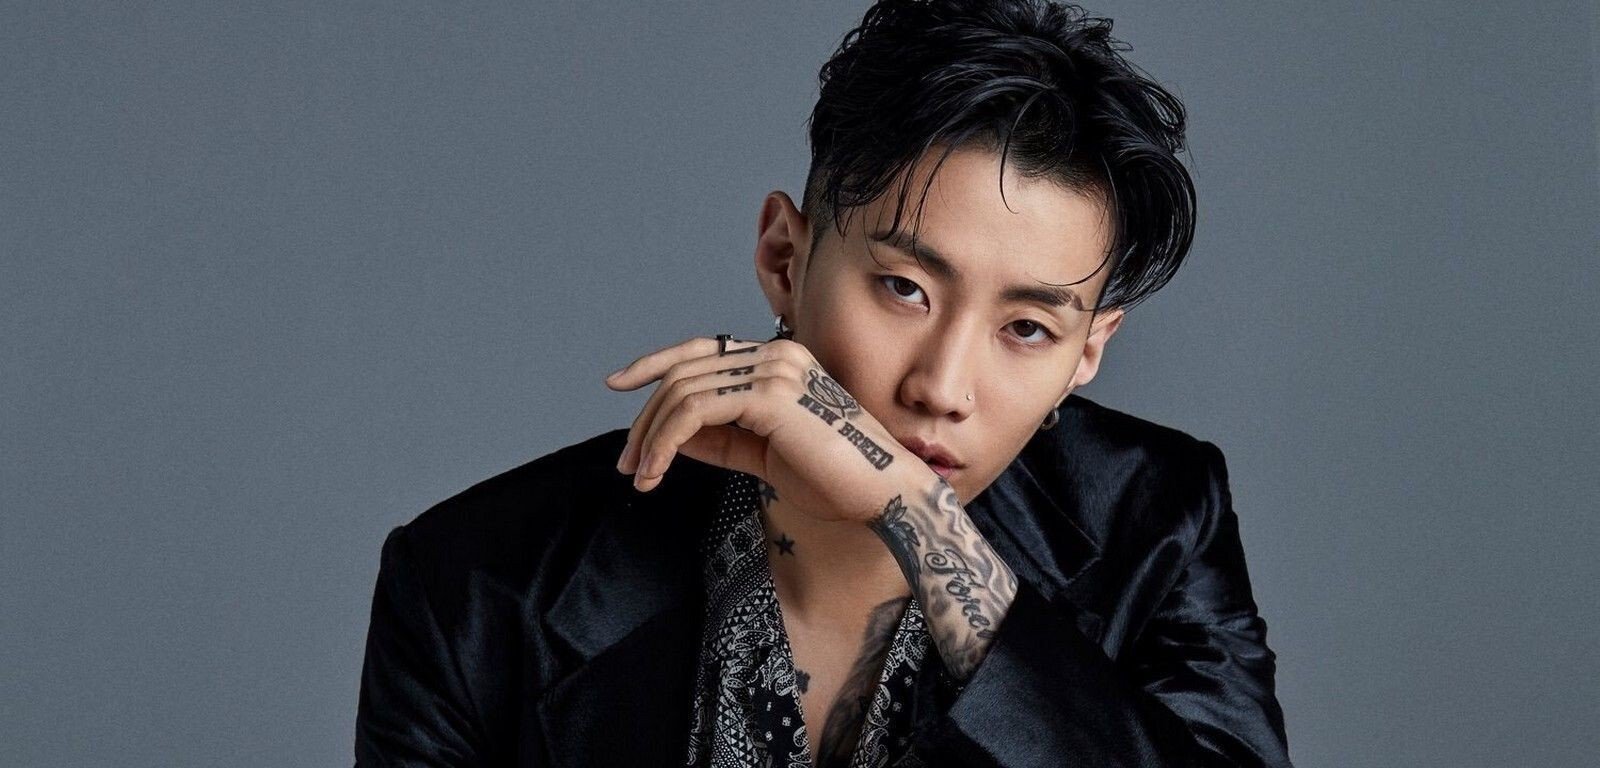 Jay Park, who has been appointed a judge for the fourth season of The Rap of China, was born in the US but is based in South Korea.